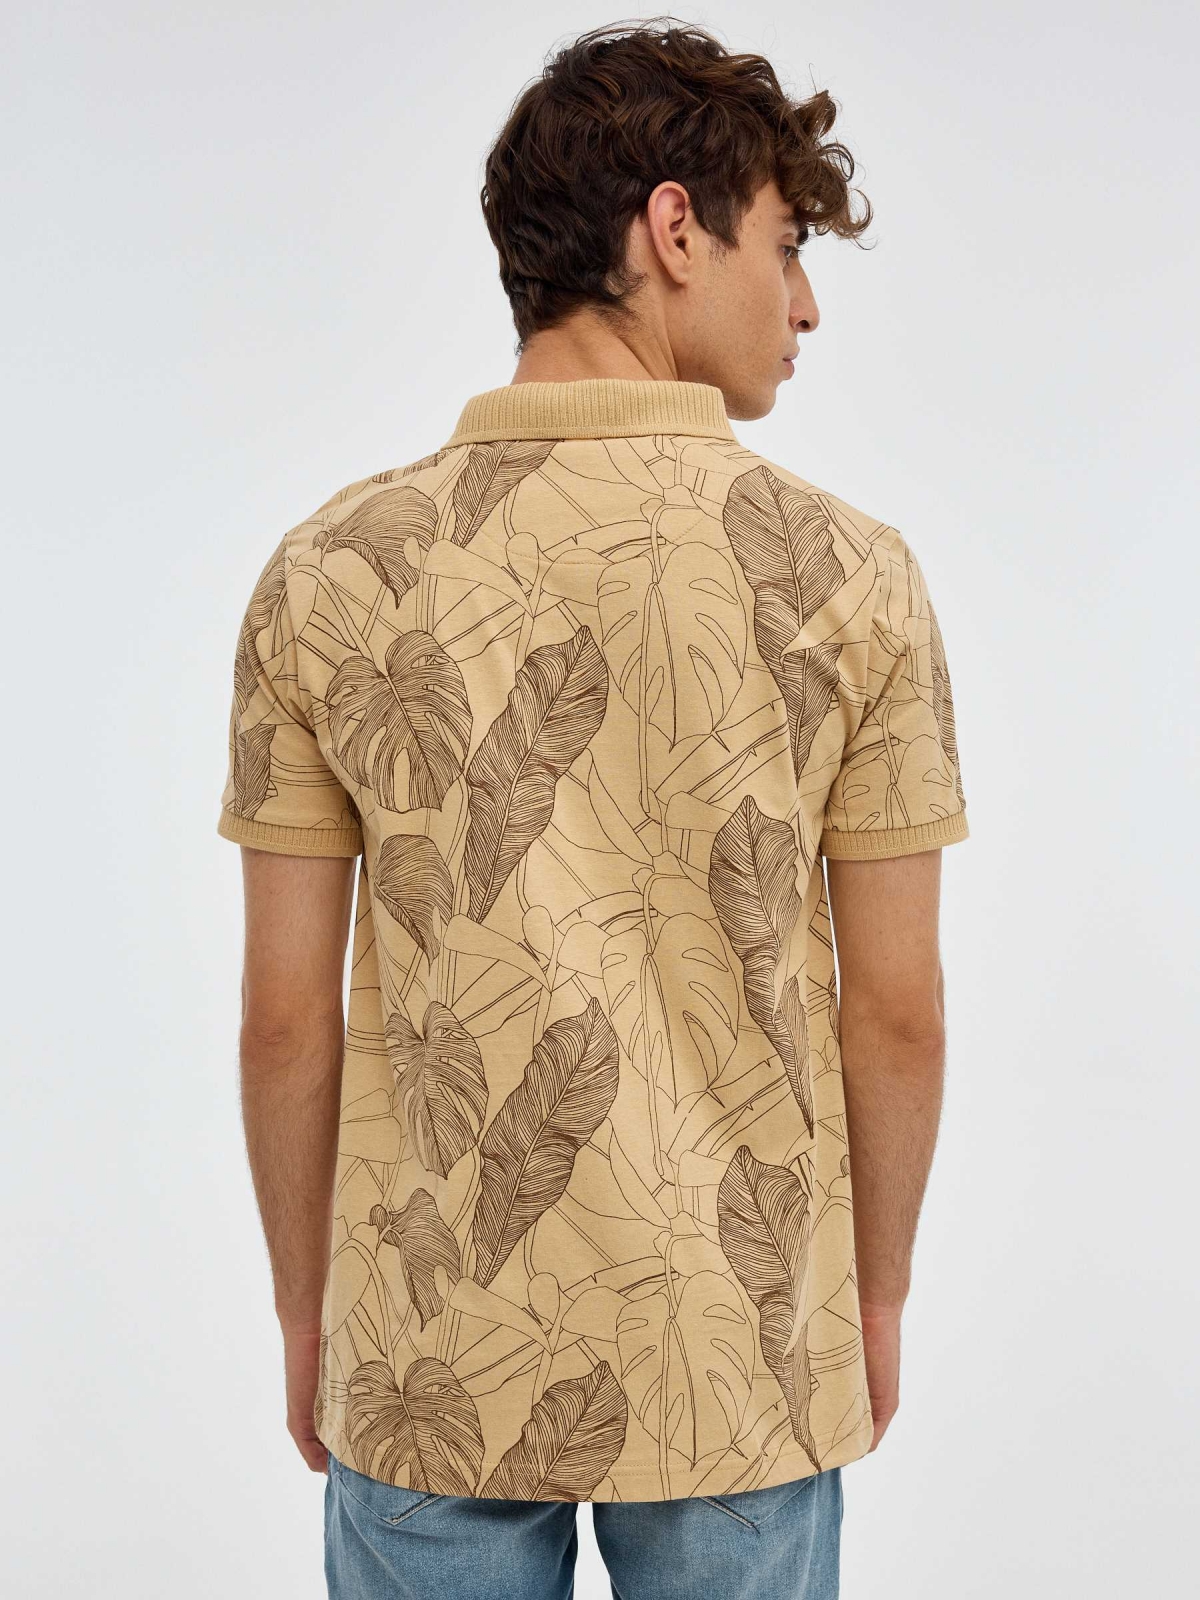 Floral print polo shirt earth brown middle back view